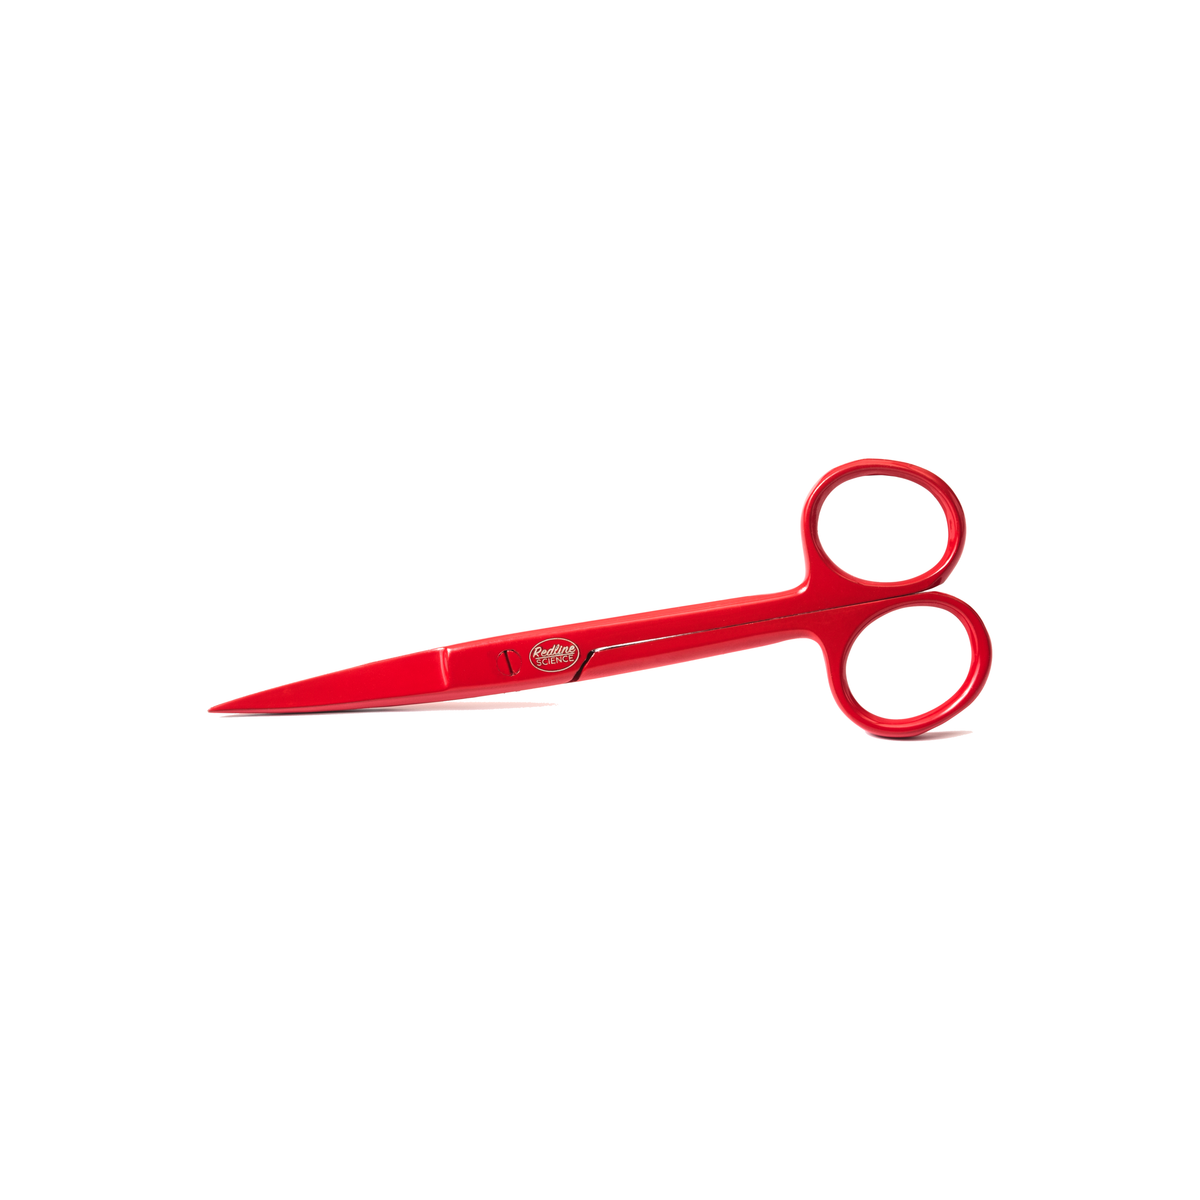 Curved Fine Point Scissors for egg cutting